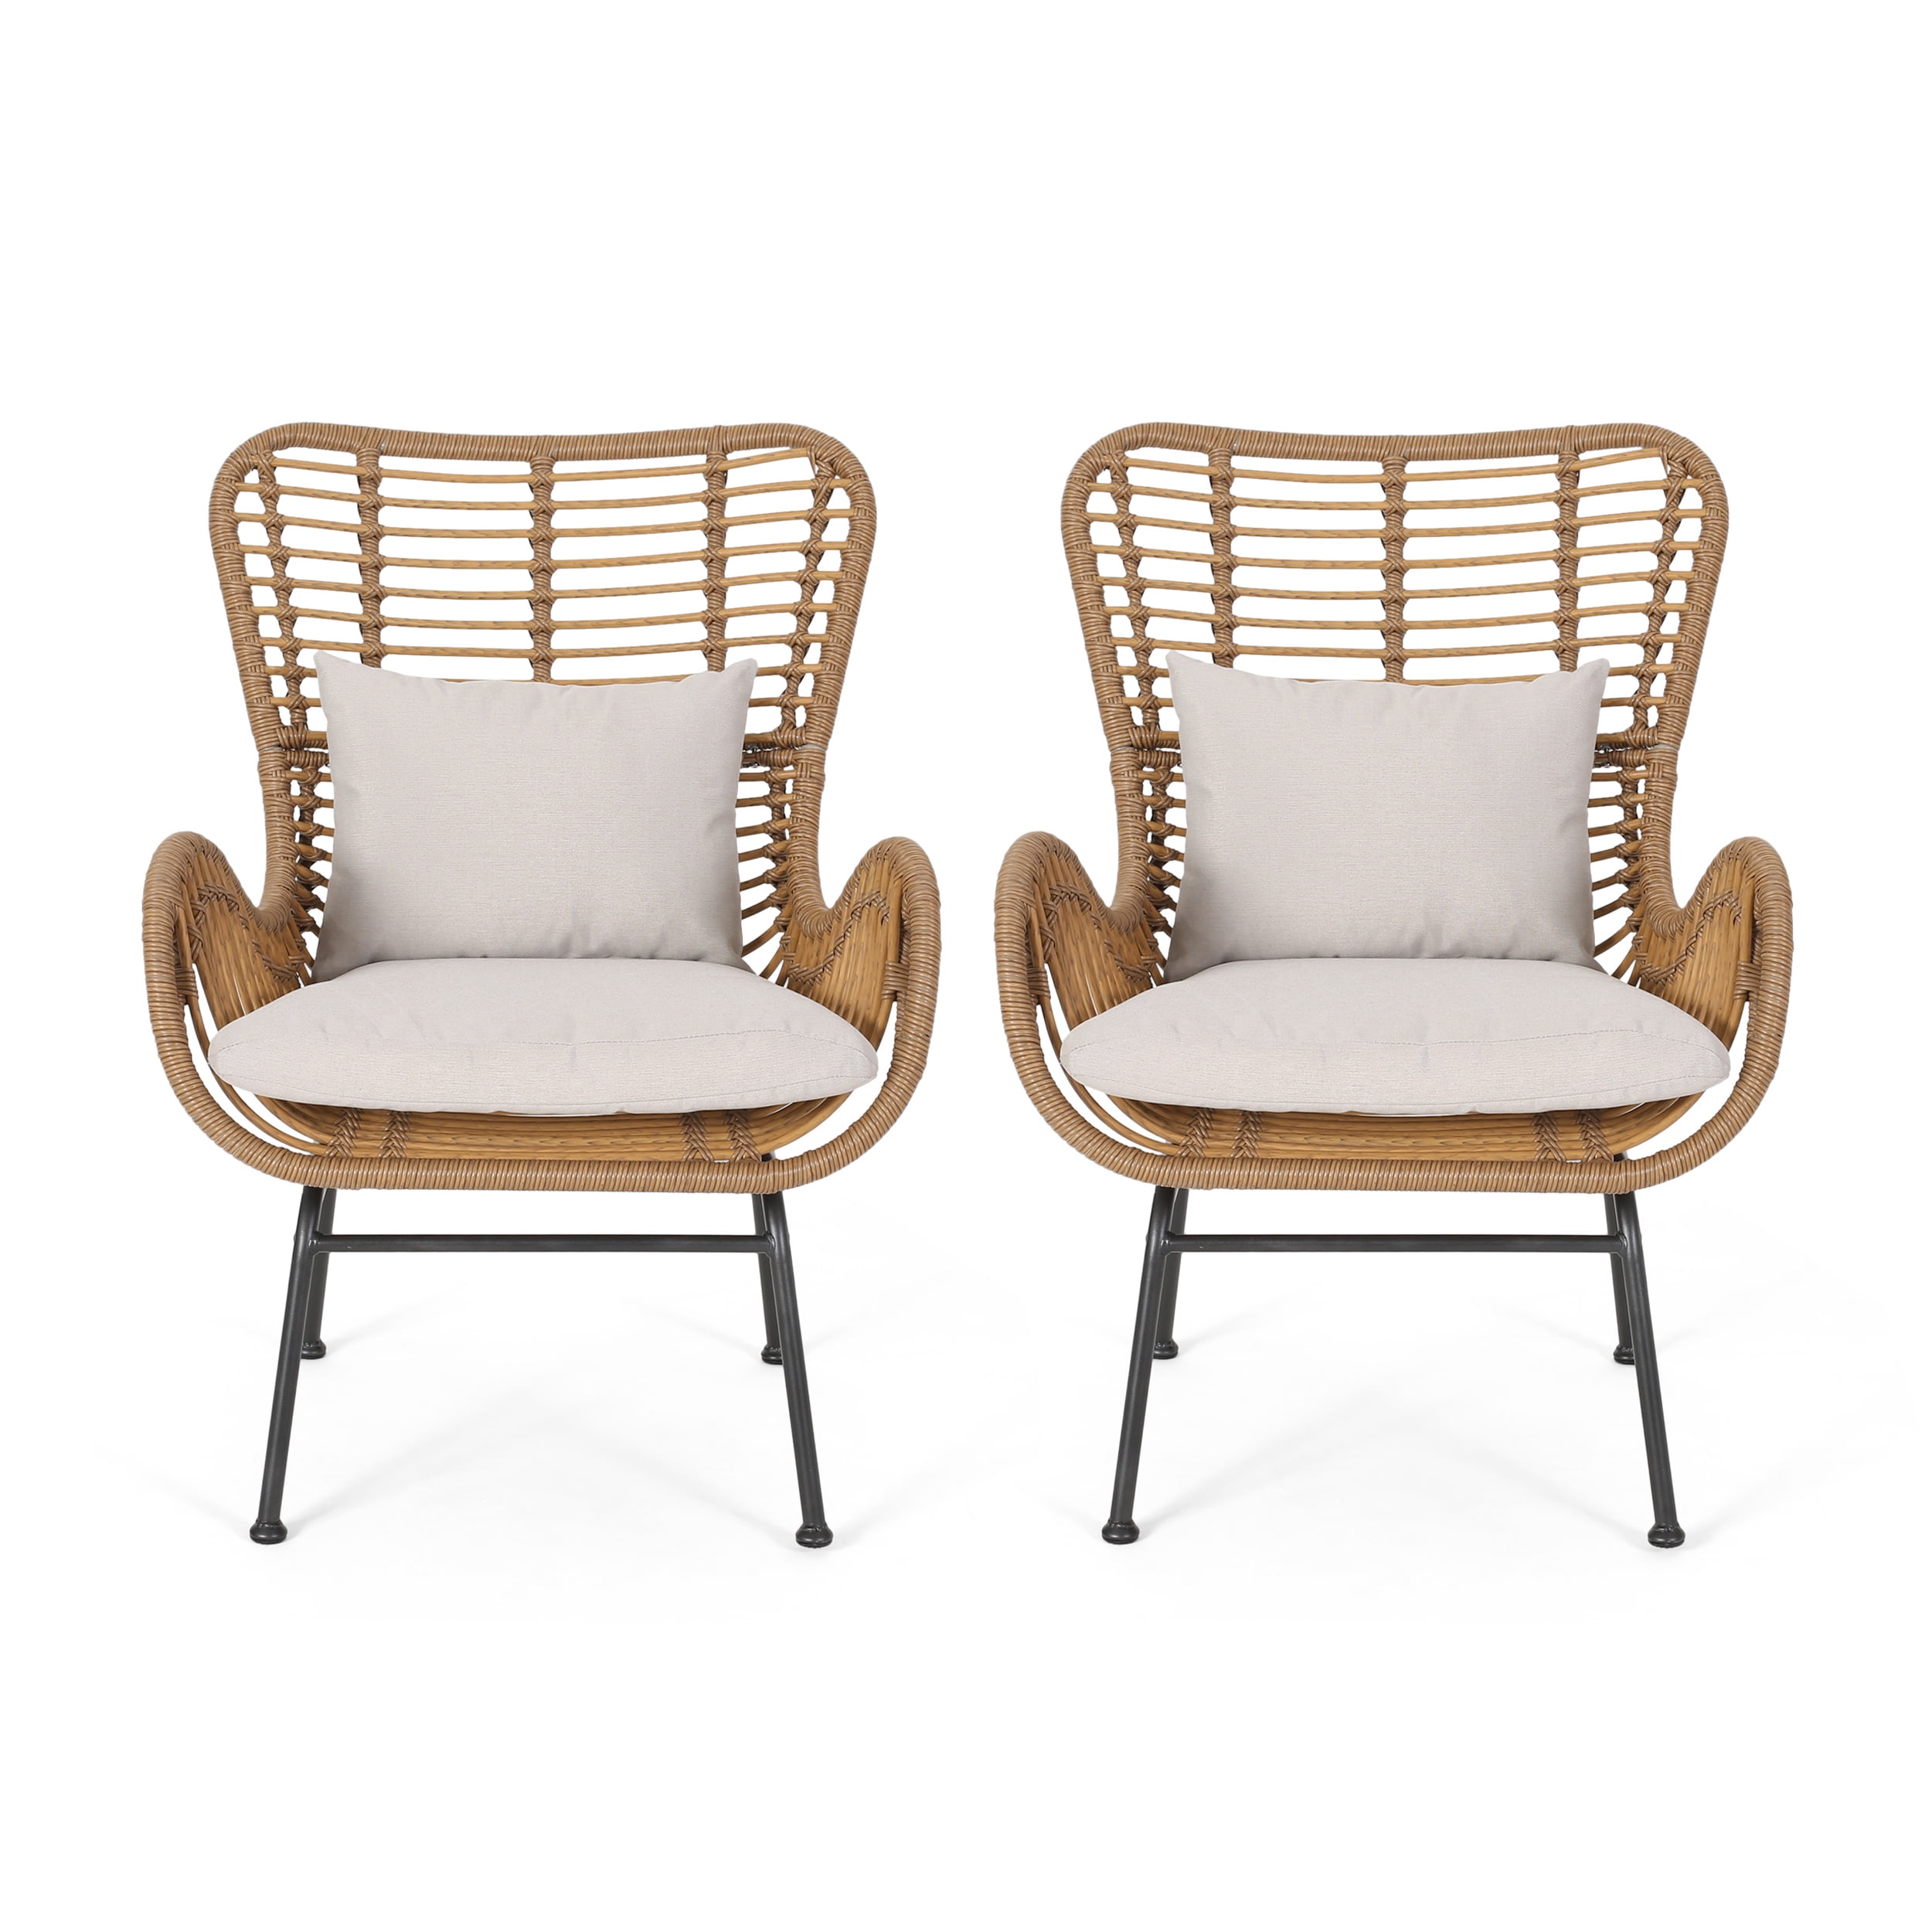 Crystal Outdoor Wicker Club Chairs With Cushions